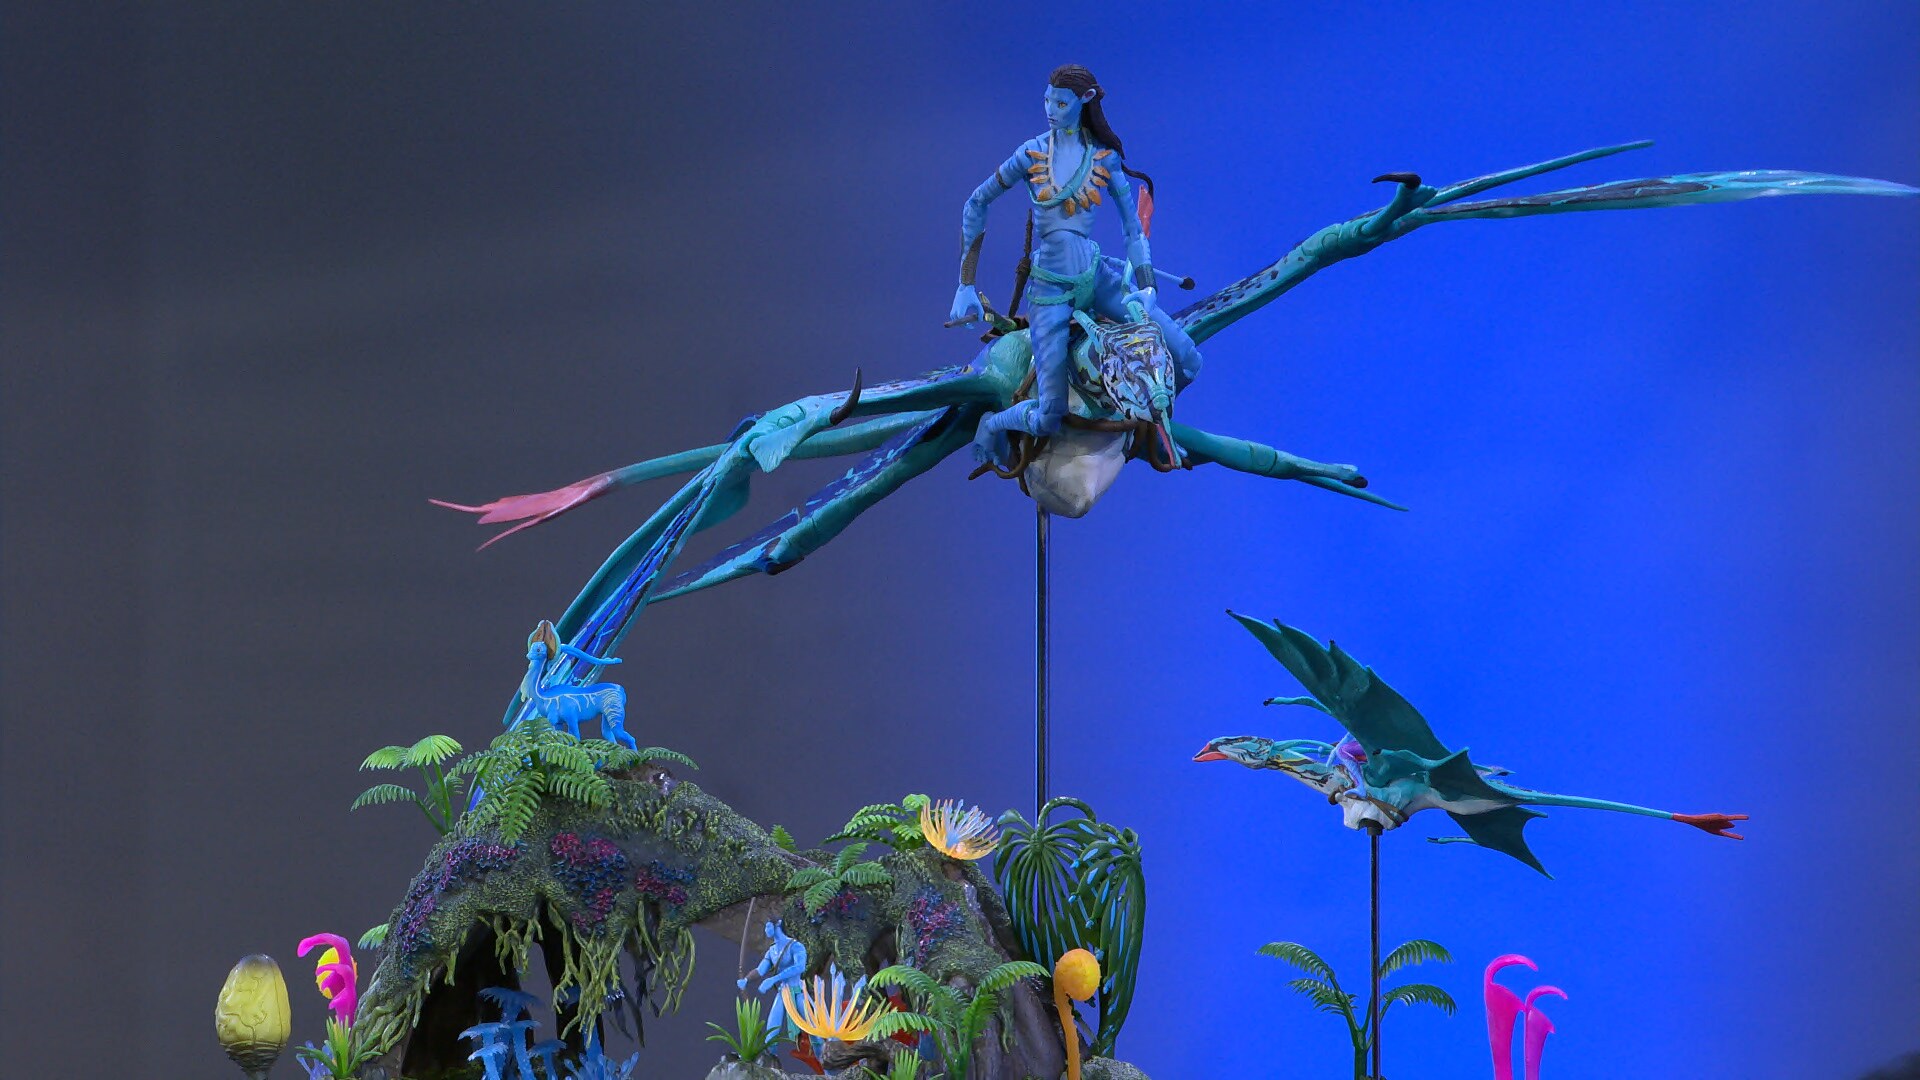 Image of a rider on a Banshee on a stand flying above fauna. There is another Banshee in the distance on a stand.